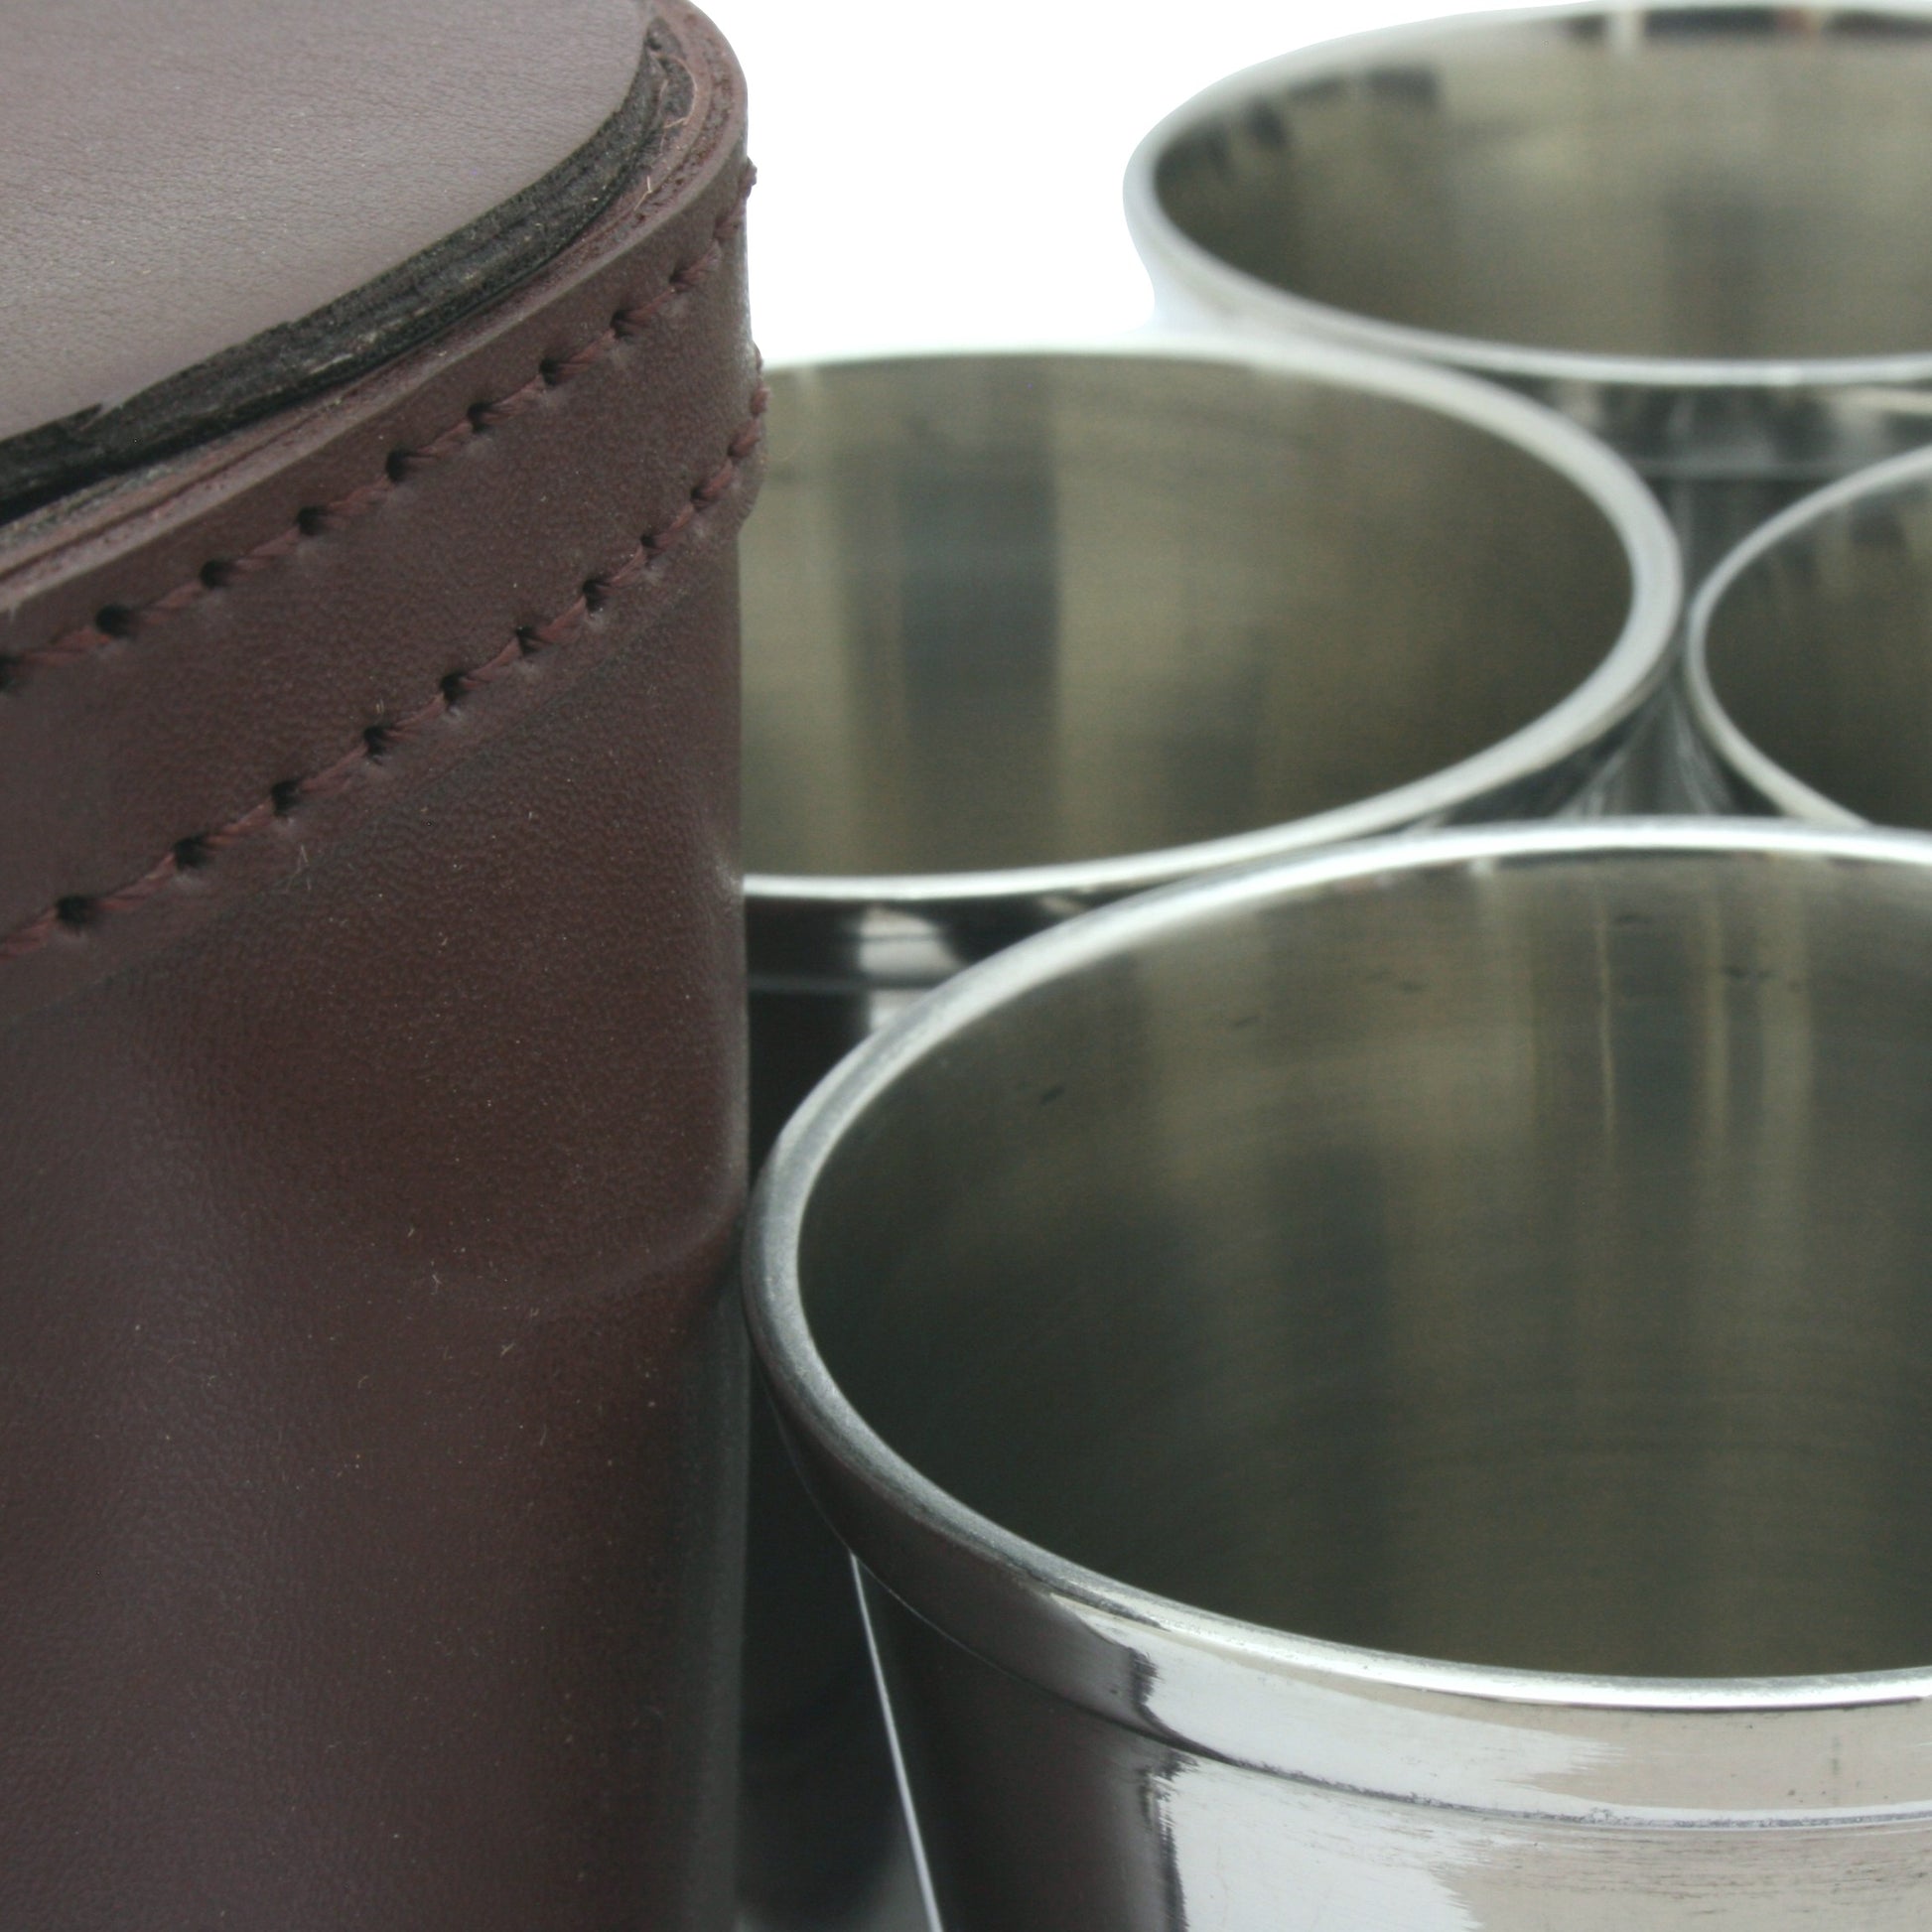 Labrador Brown 4 leather Cups